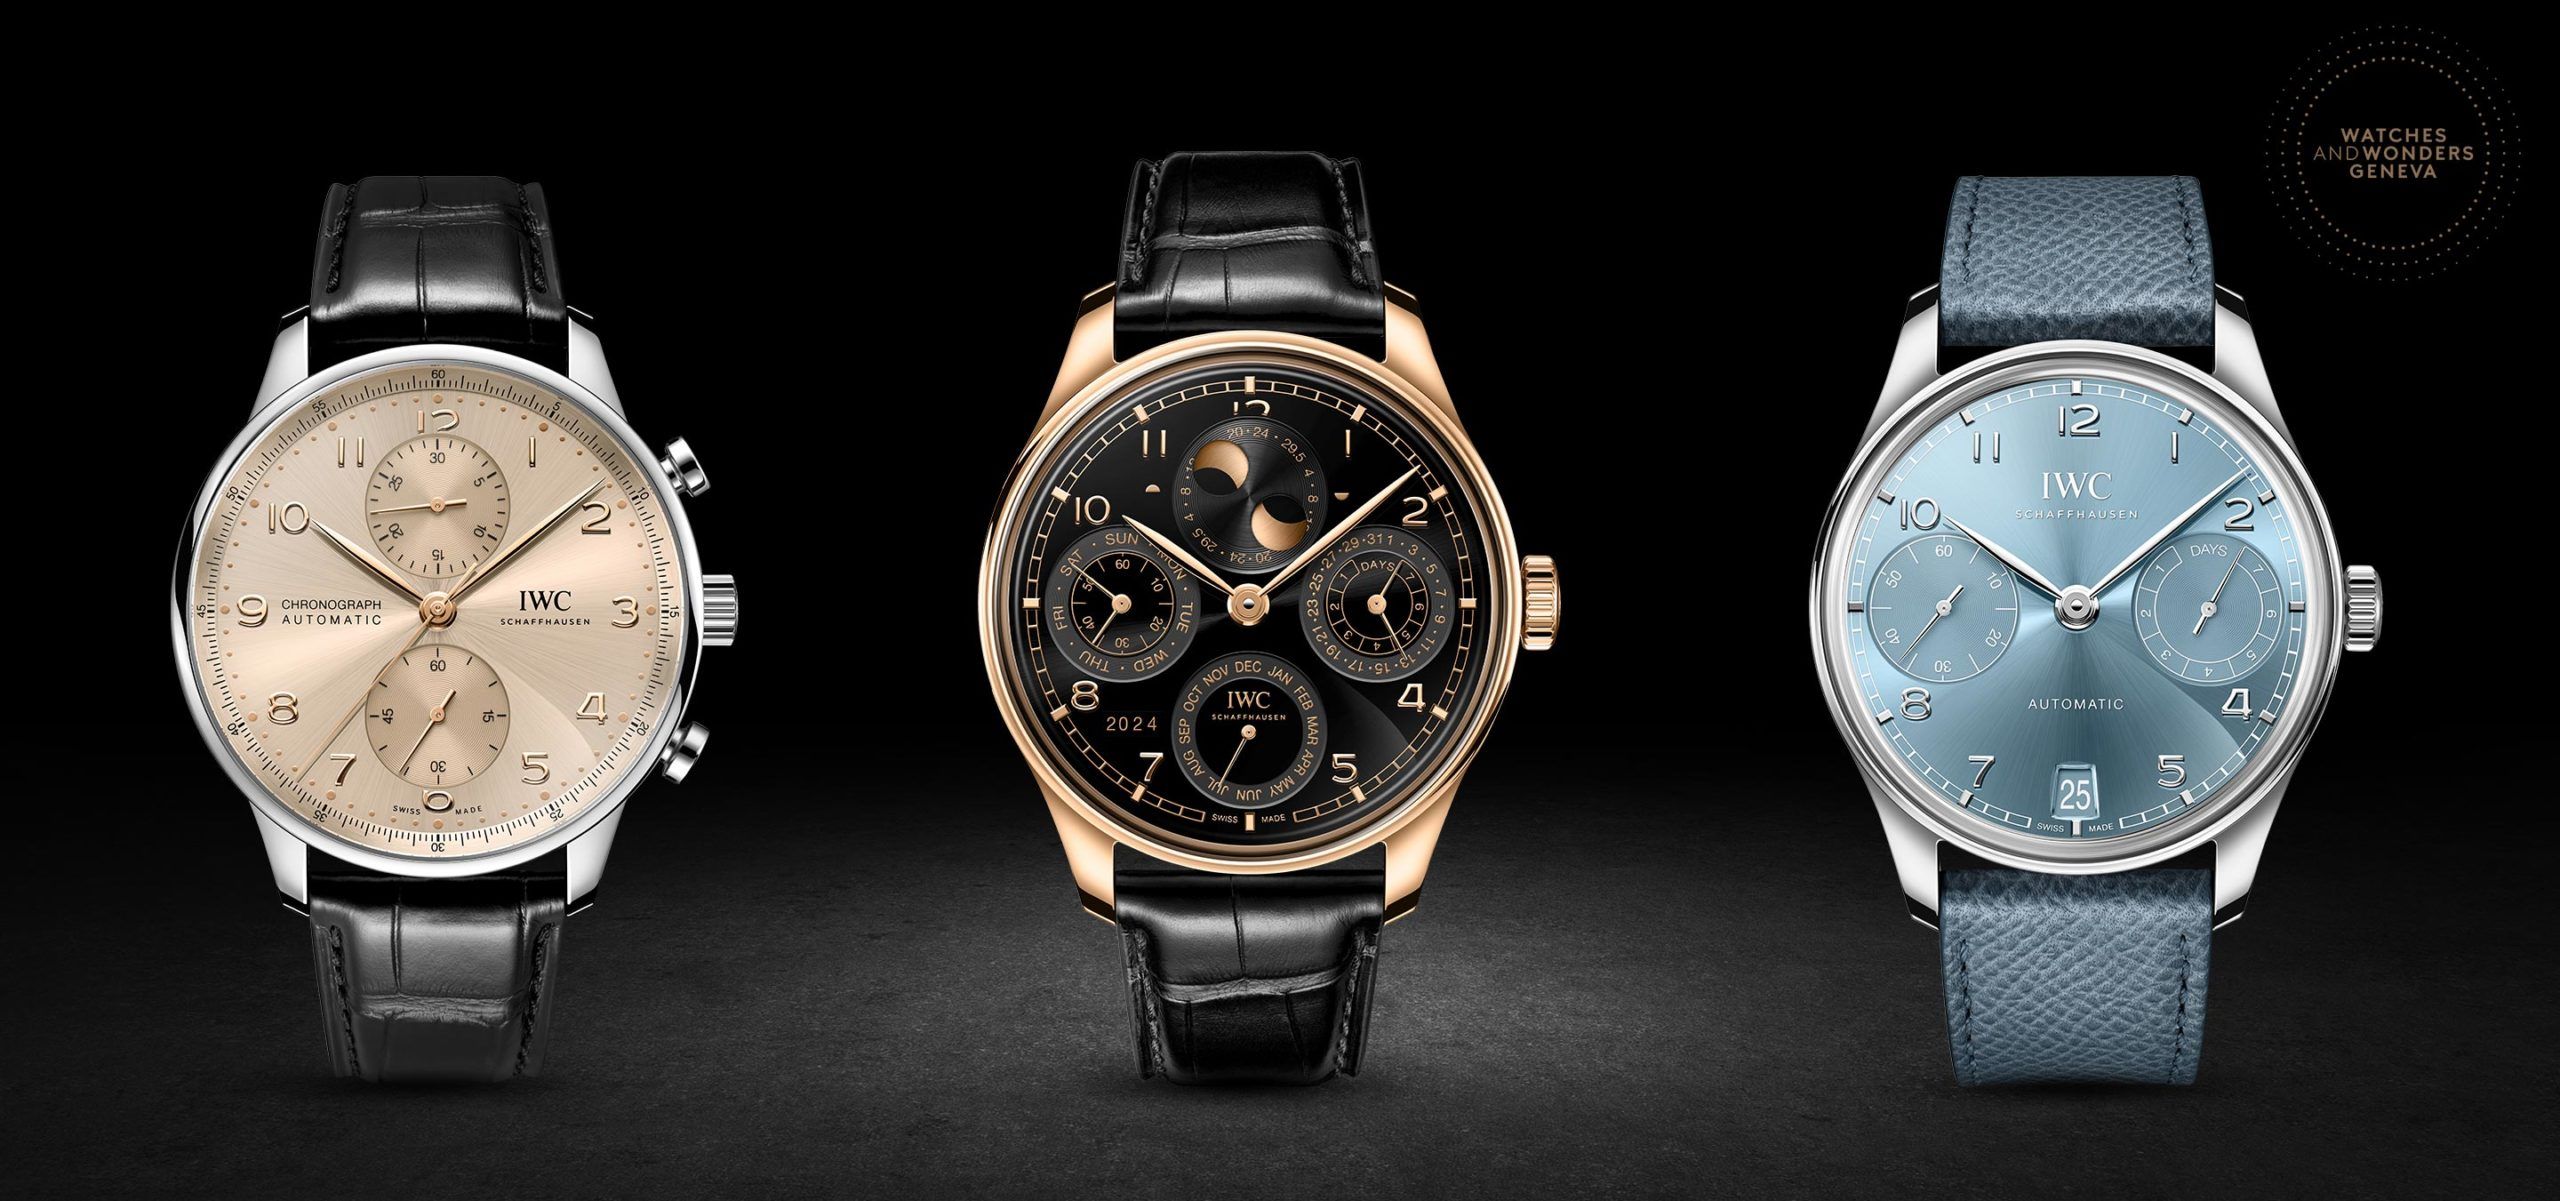 IWC Build-Up On Their Portugieser Collection With New Perpetual Calendars, Chronographs, And Tourbillon Models